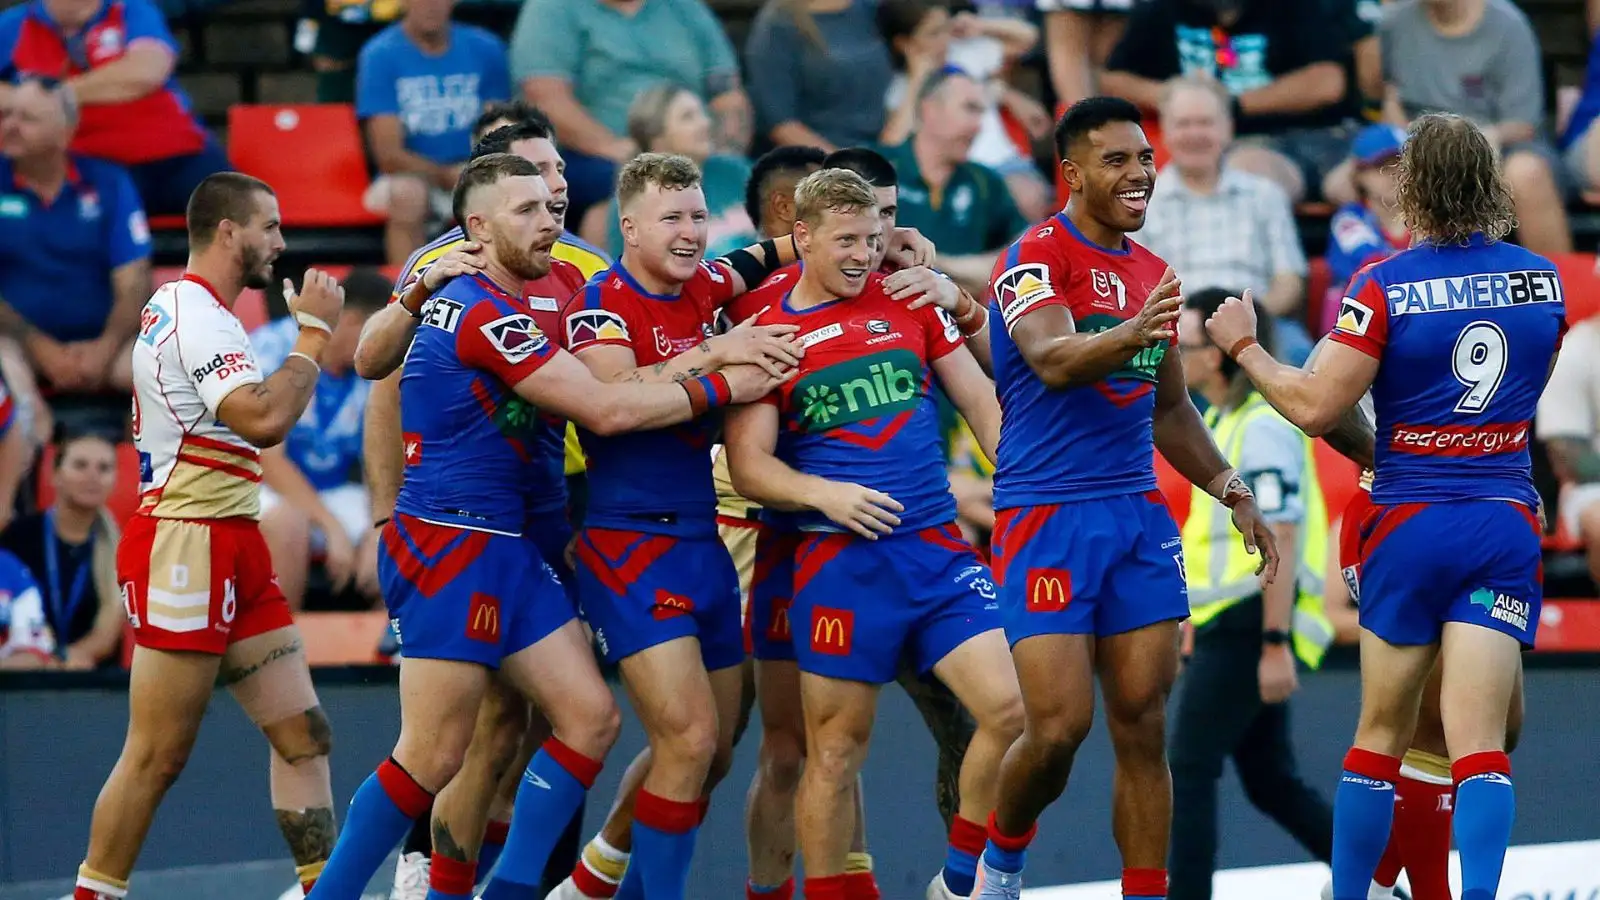 Lachlan Miller celebrates with his Newcastle Knights team-mates against Dolphins in the NRL. Photo by AAP Image/Darren Pateman.